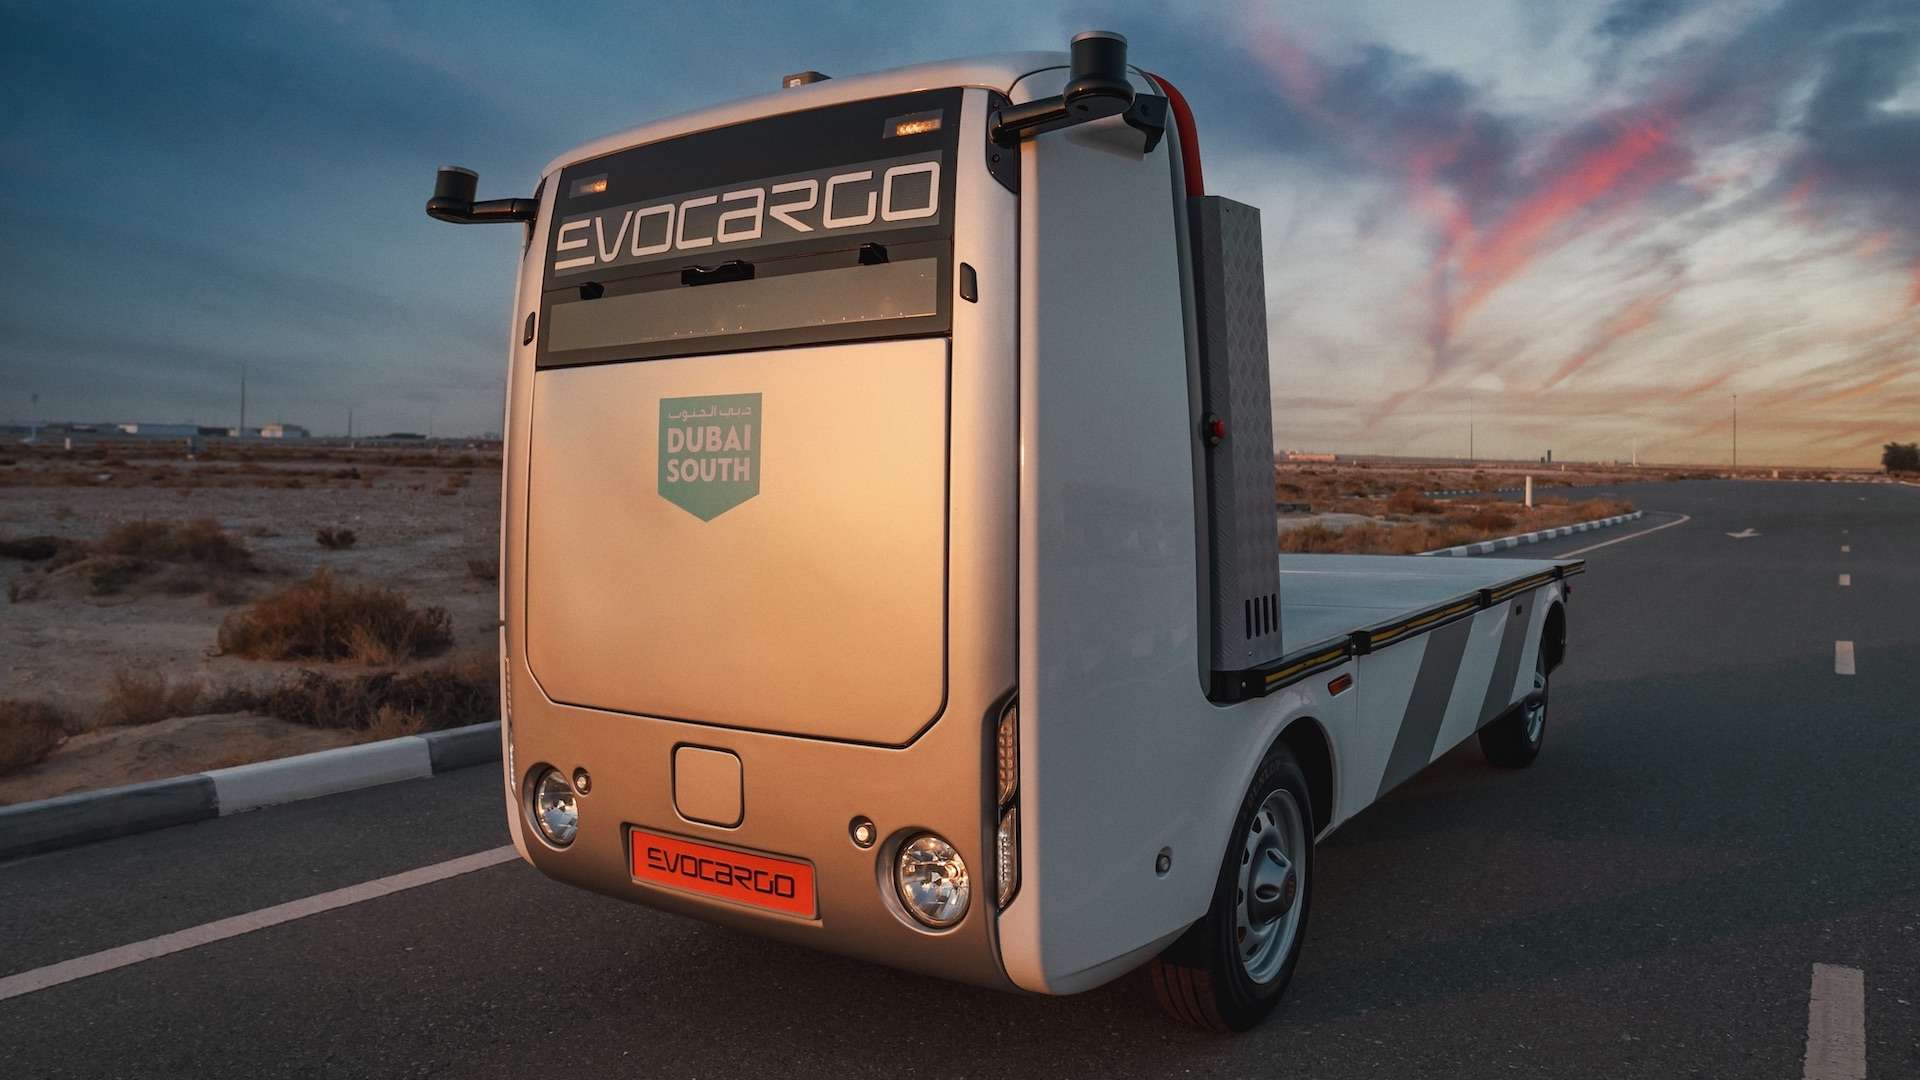 UAE conducts first driverless truck trials led by Dubai South and Evocargo